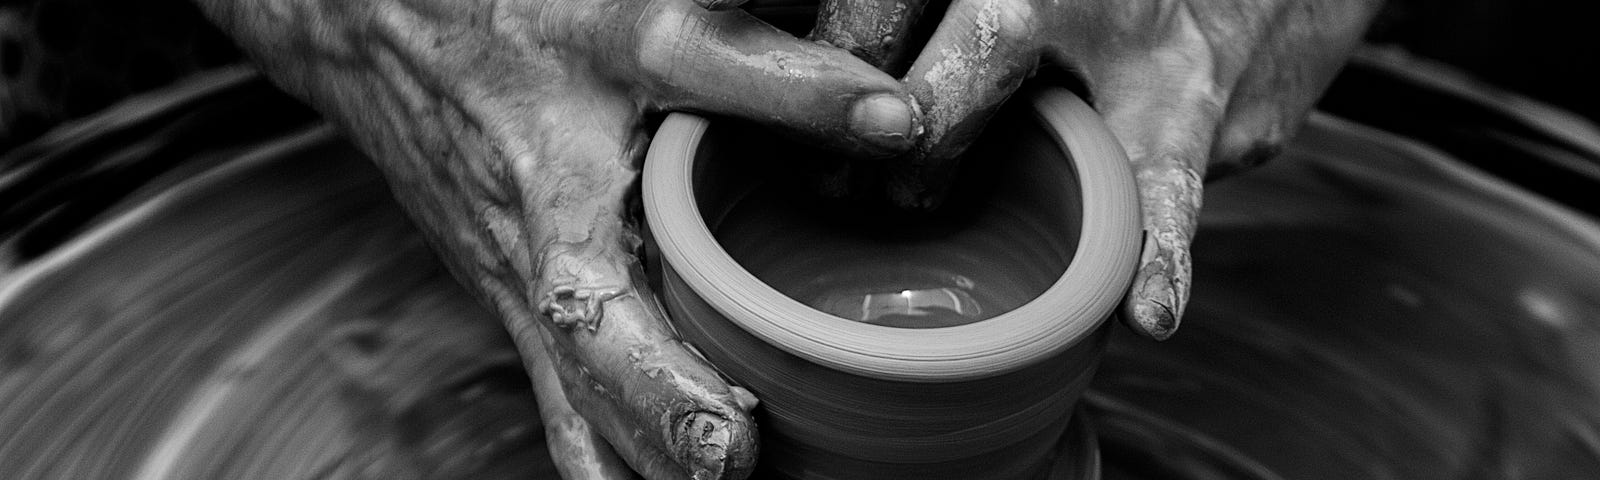 Black and white photo of two old hands shaping clay into a container while it sits on a spinning wheel.